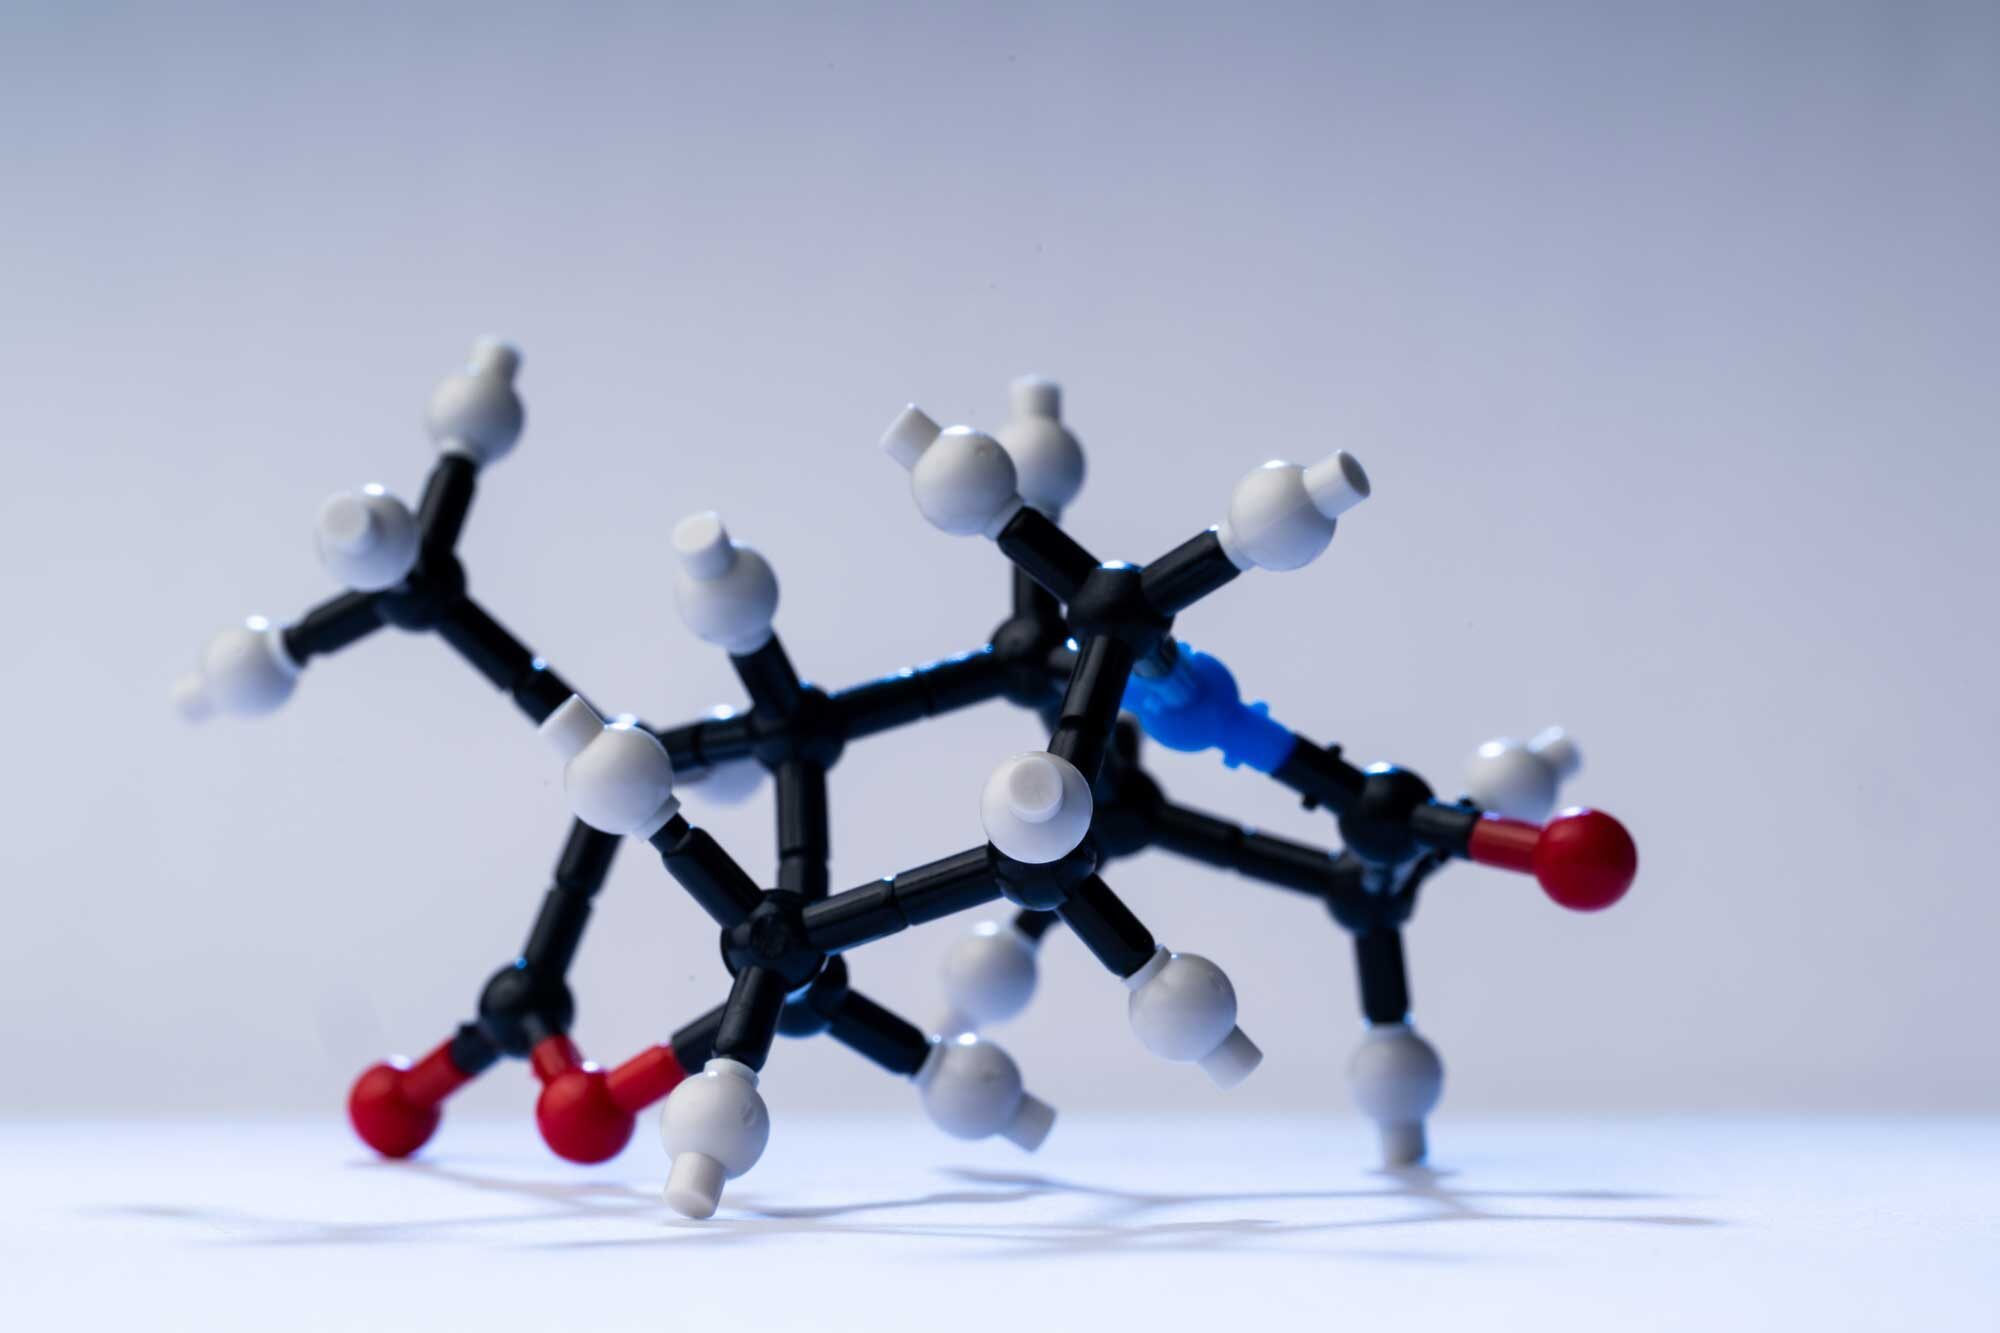 Replica of the complex molecule, stemoamide, built in mere three steps in Tim Cernak’s Lab. Image credit: Austin Thomason, Michigan Photography